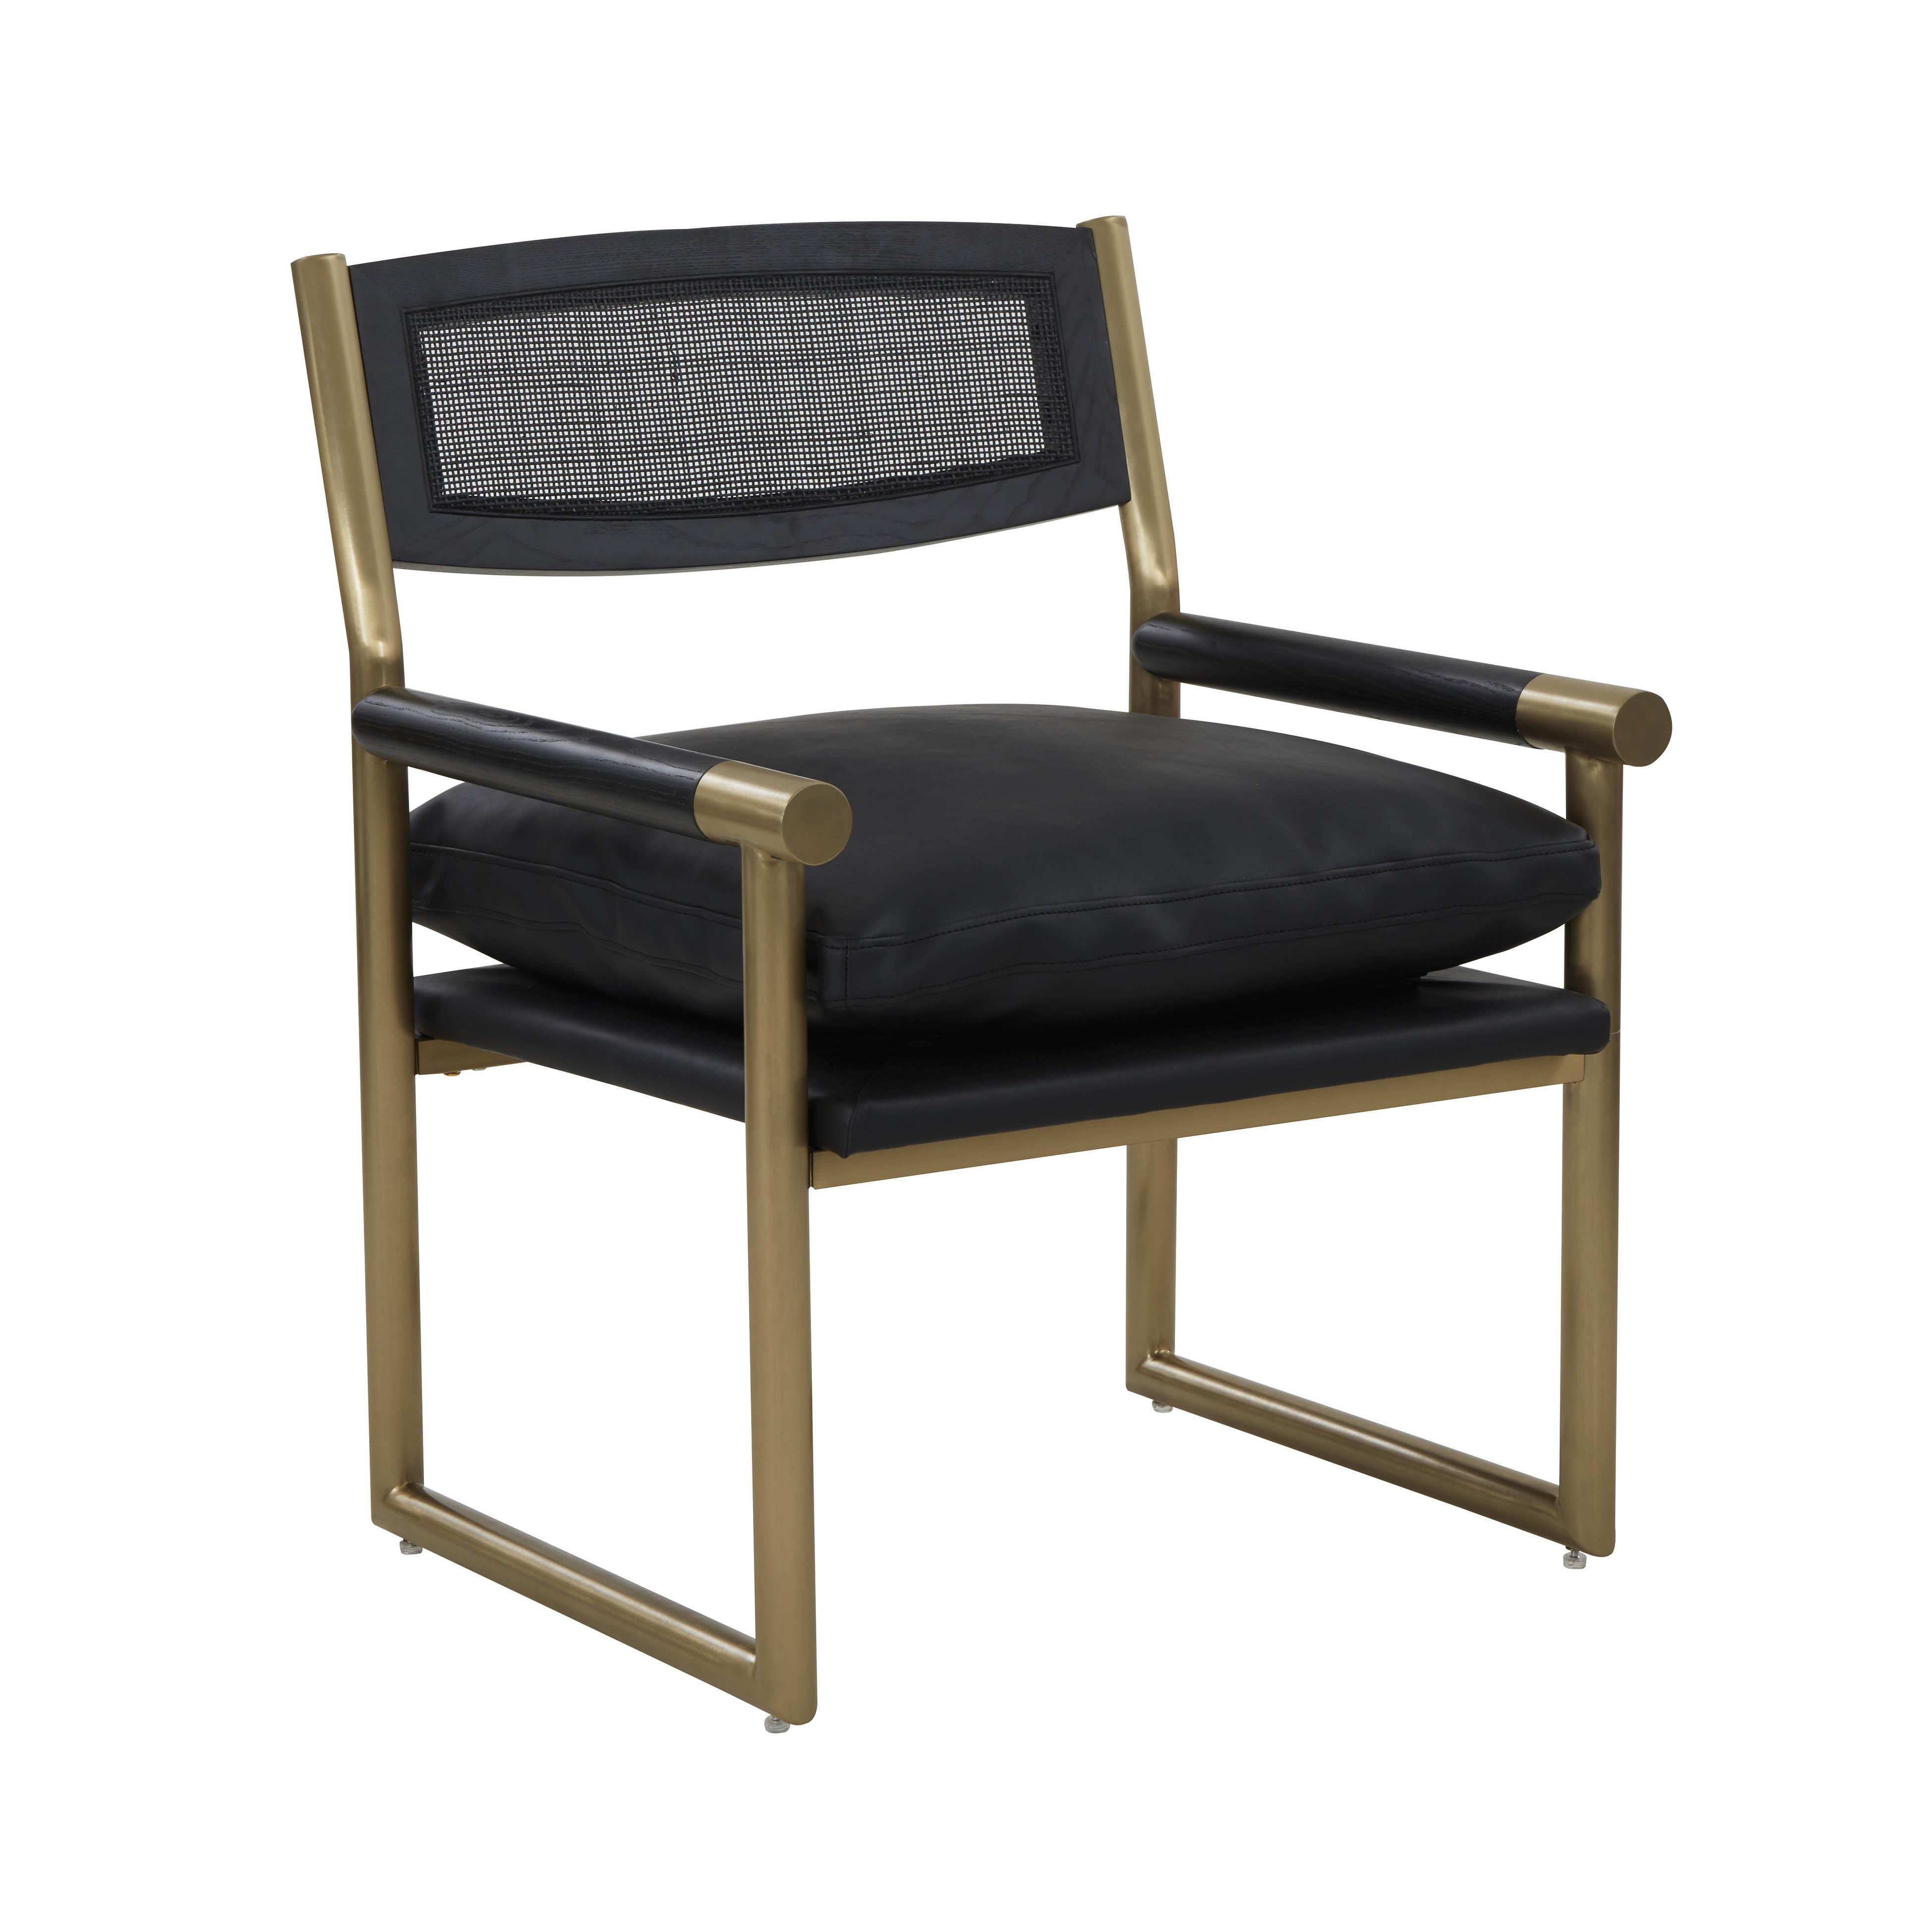 Tov Furniture Accent Chairs - Harlow Black Vegan Leather Armchair